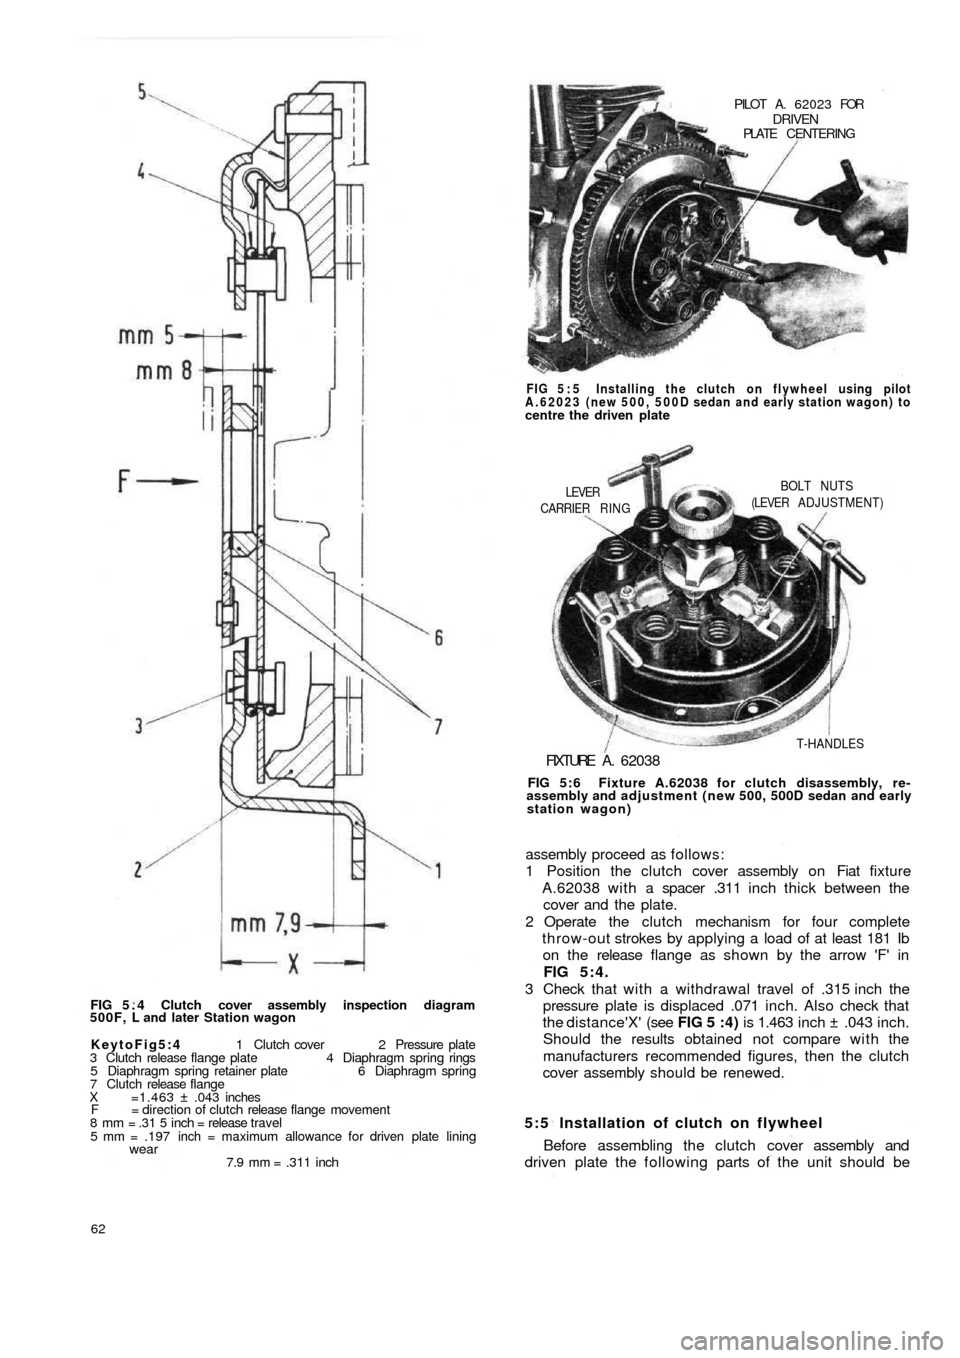 FIAT 500 1968 1.G Workshop Manual FIG 5 . 4  Clutch cover assembly inspection diagram
500F, L and later Station wagon
KeytoFig5:4 1 Clutch cover 2 Pressure plate
3 Clutch release flange plate 4 Diaphragm spring rings
5 Diaphragm sprin